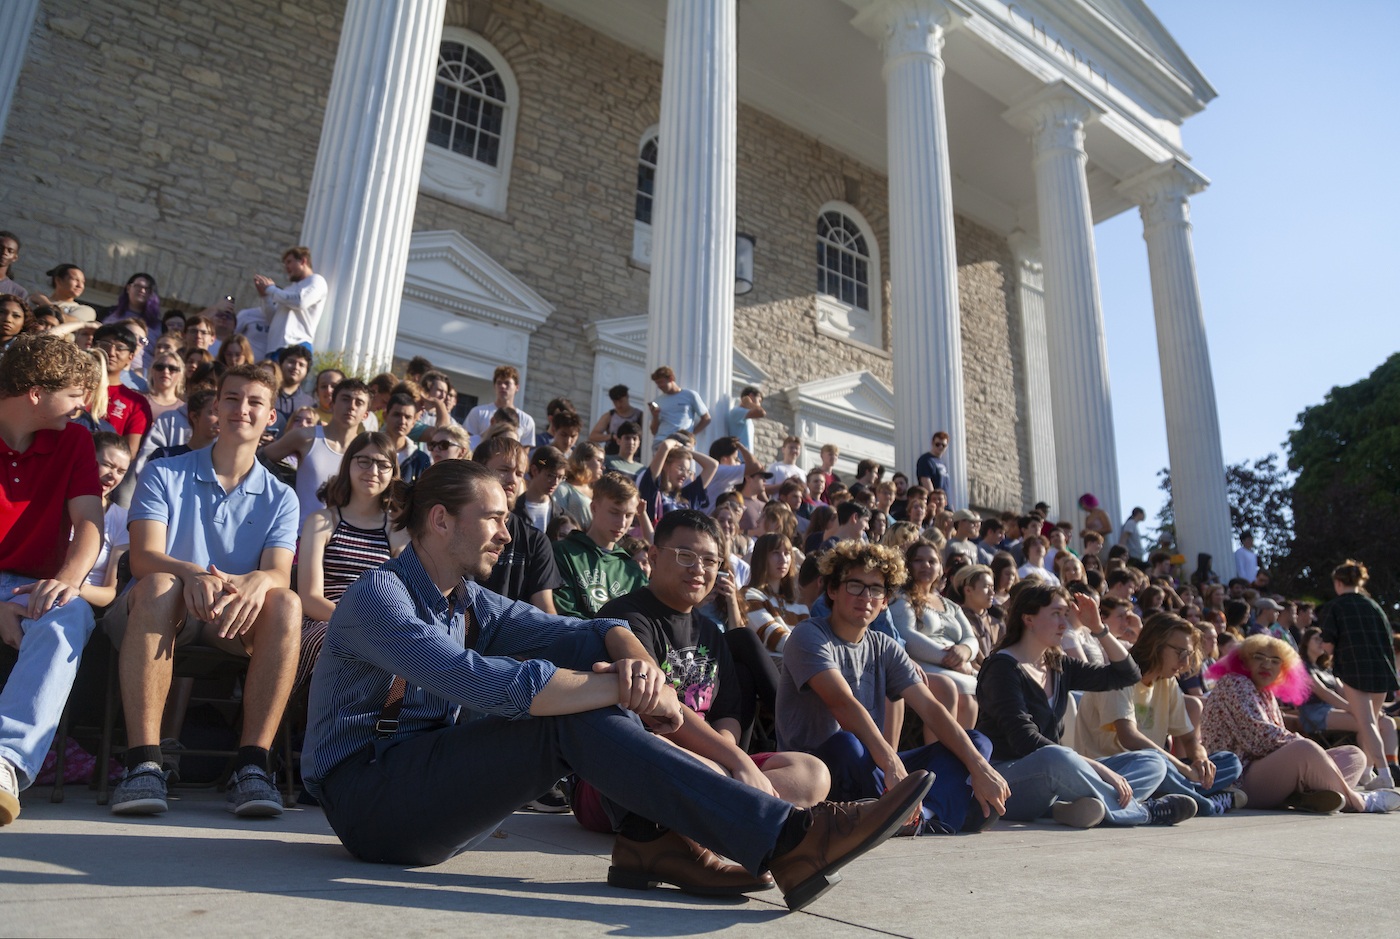 Bohdan Tataryn (front) joins classmates for a Class of 2026 photo in front of Memorial Chapel during Welcome Week in September.